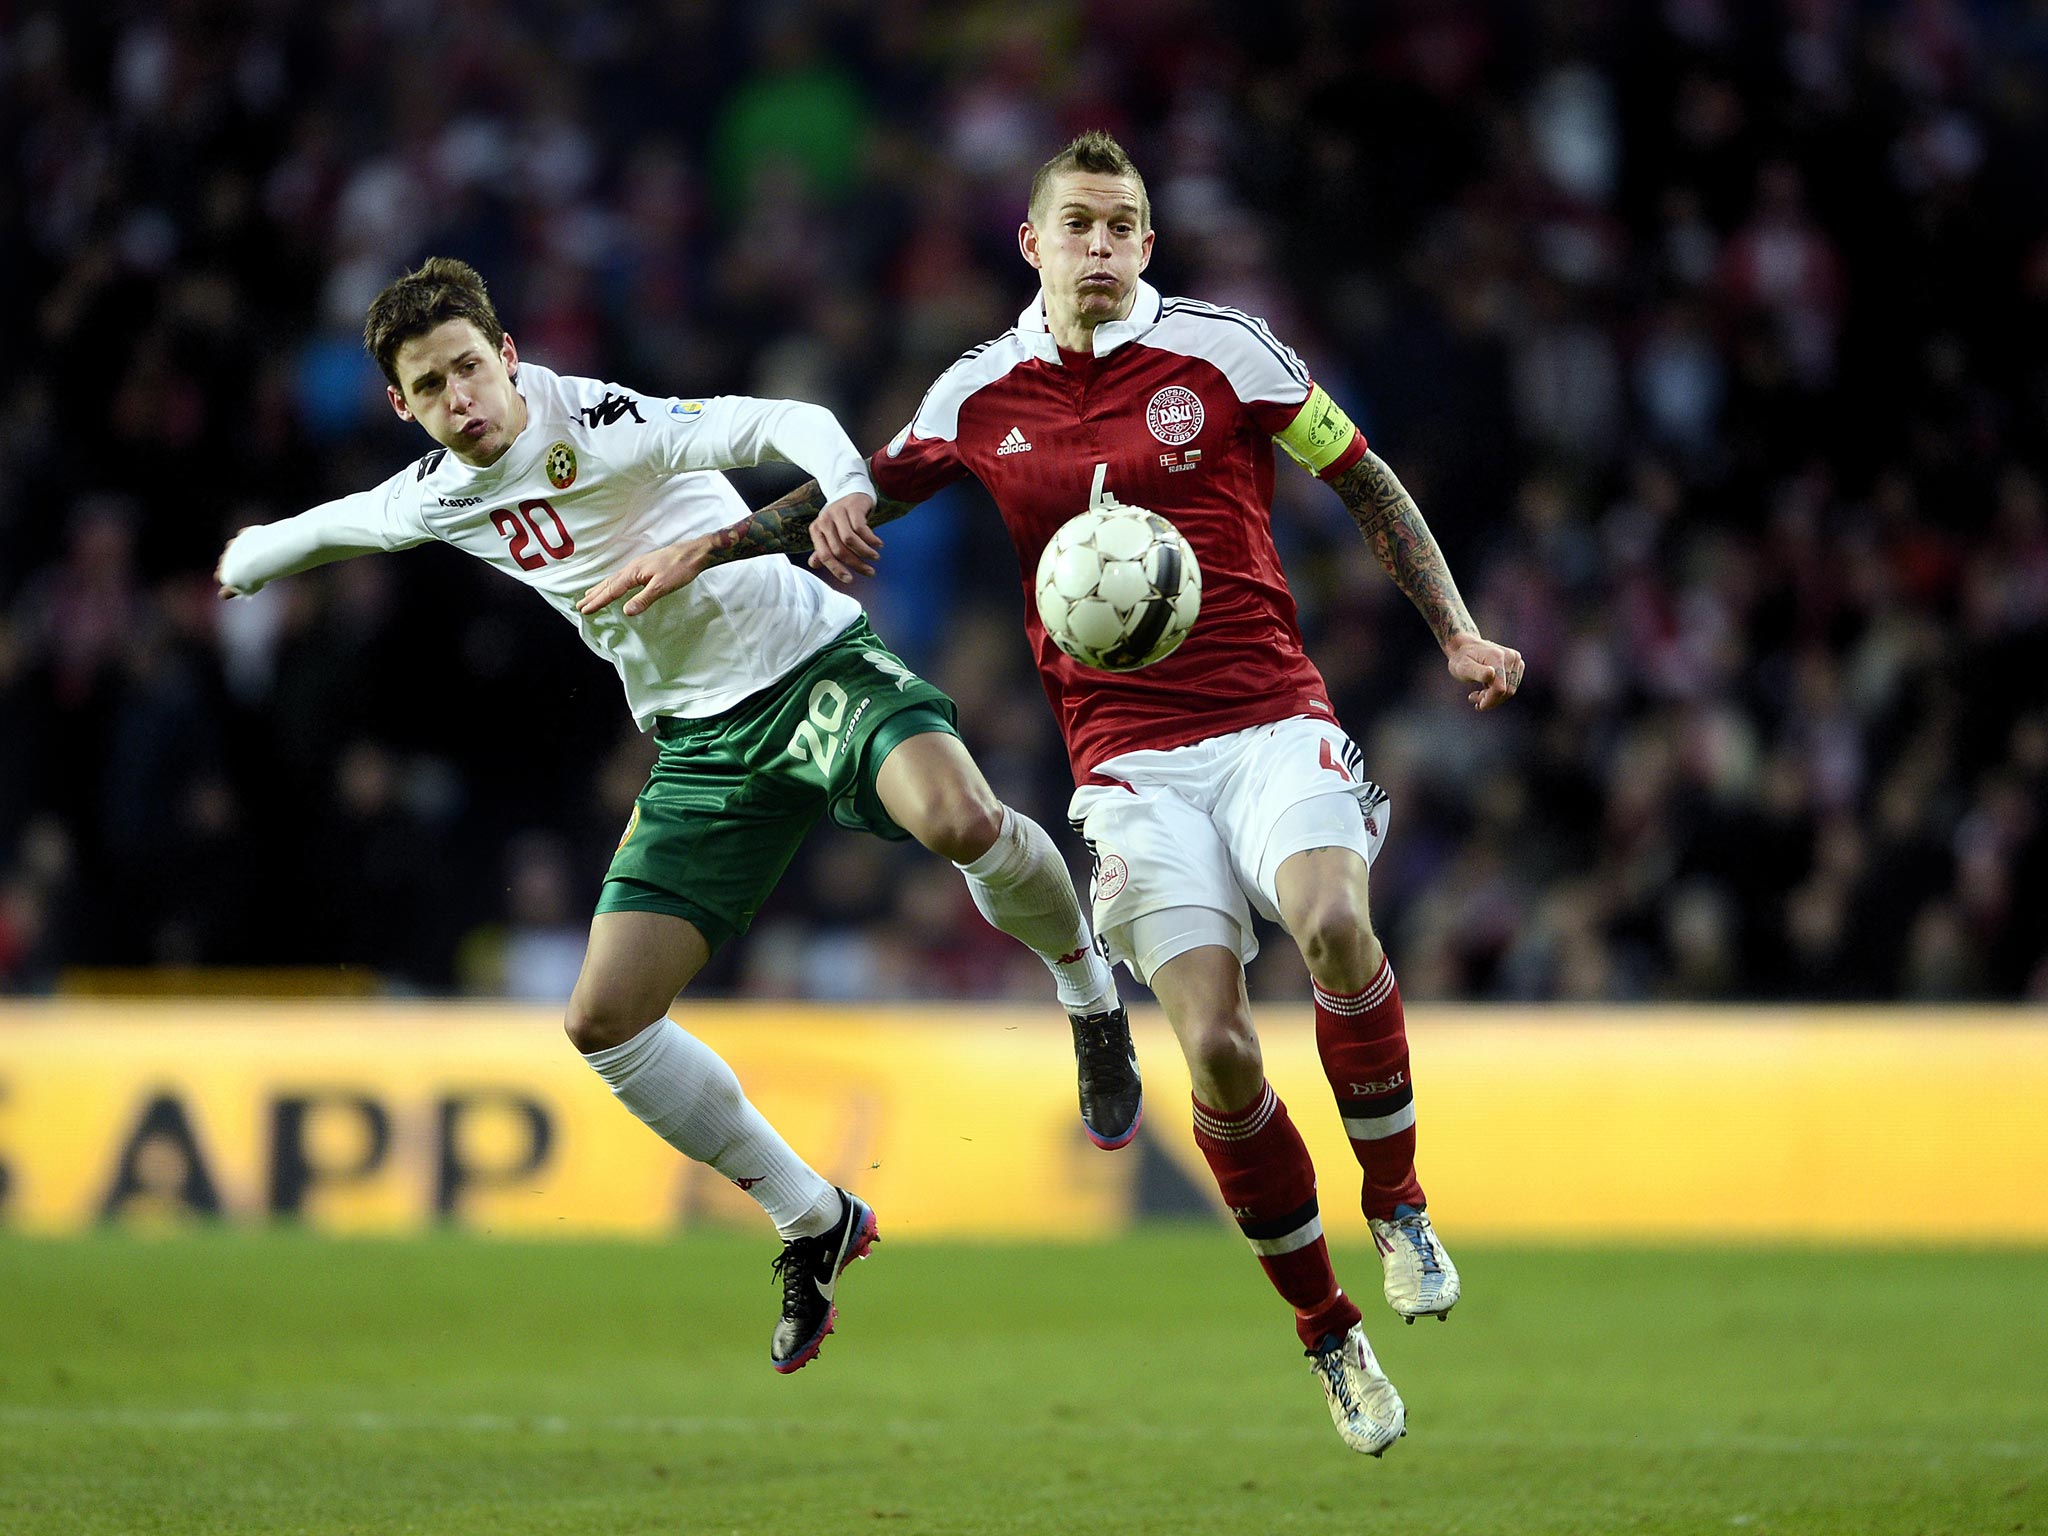 Daniel Agger is relishing leading out his country against England at Wembley tomorrow night